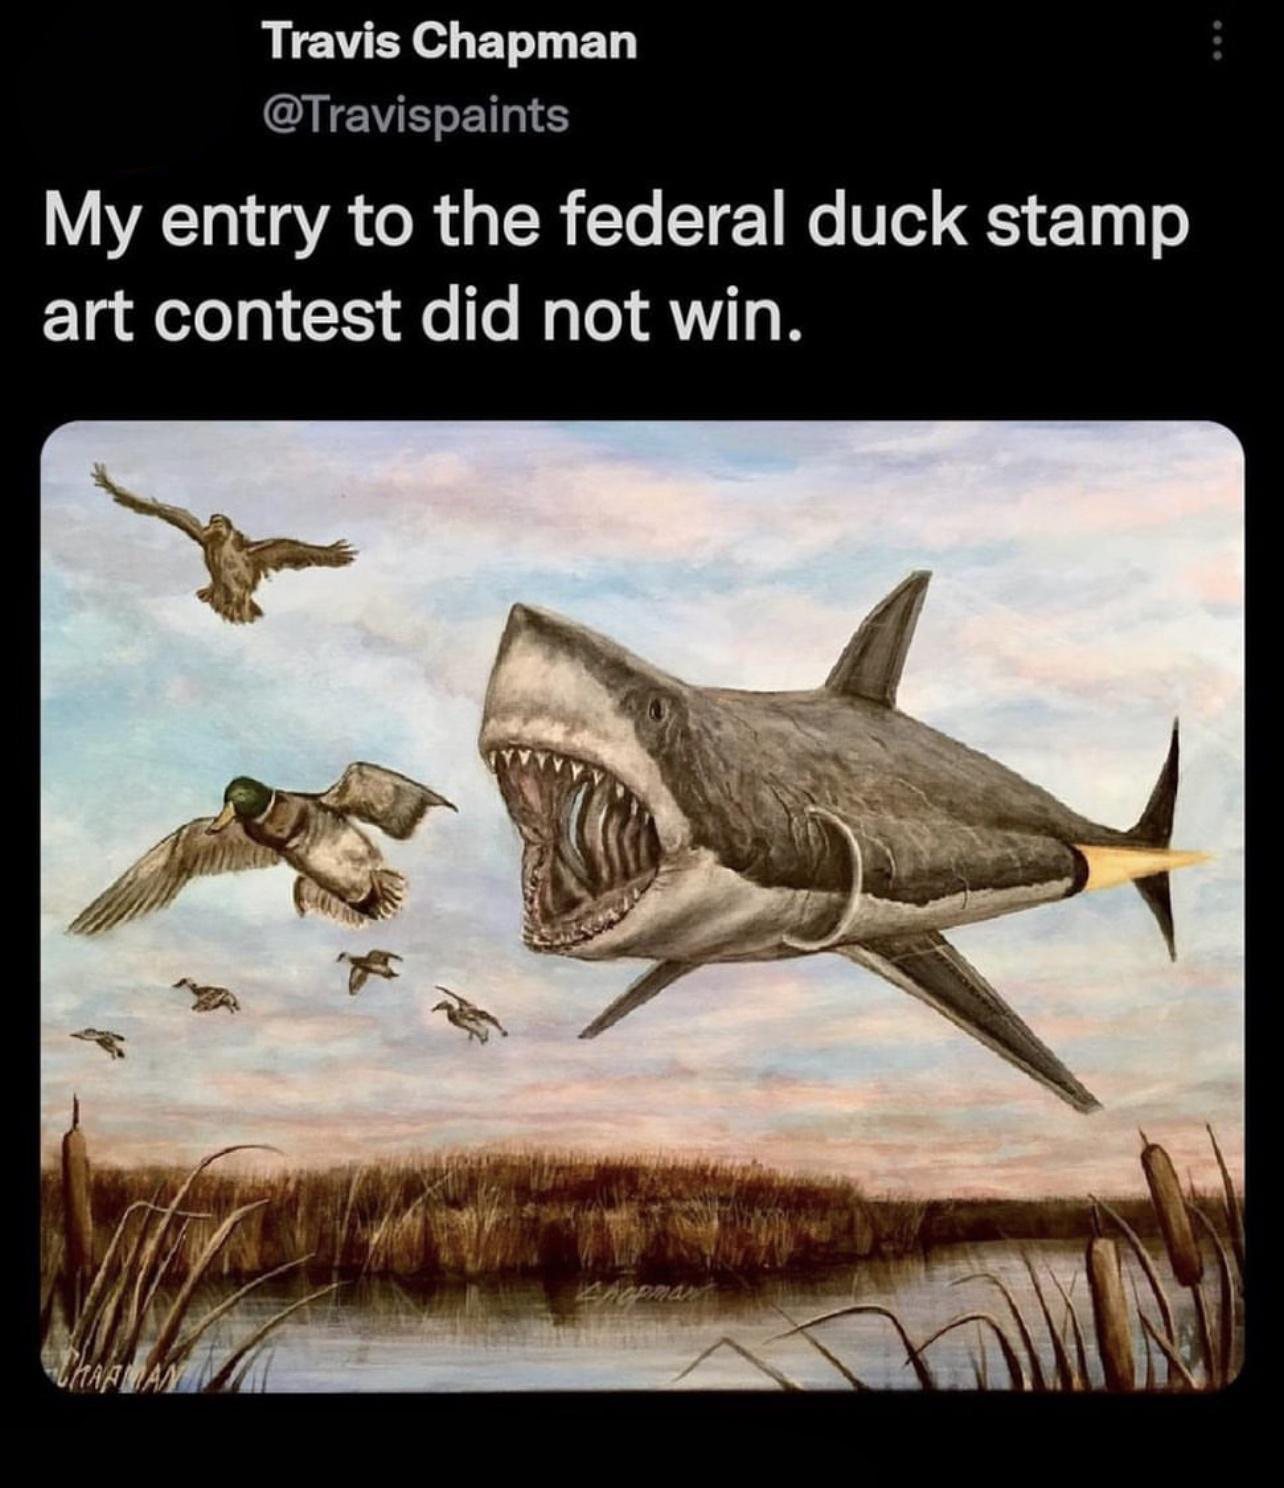 funny tweets - federal duck stamp art contest shark - Travis Chapman My entry to the federal duck stamp art contest did not win.